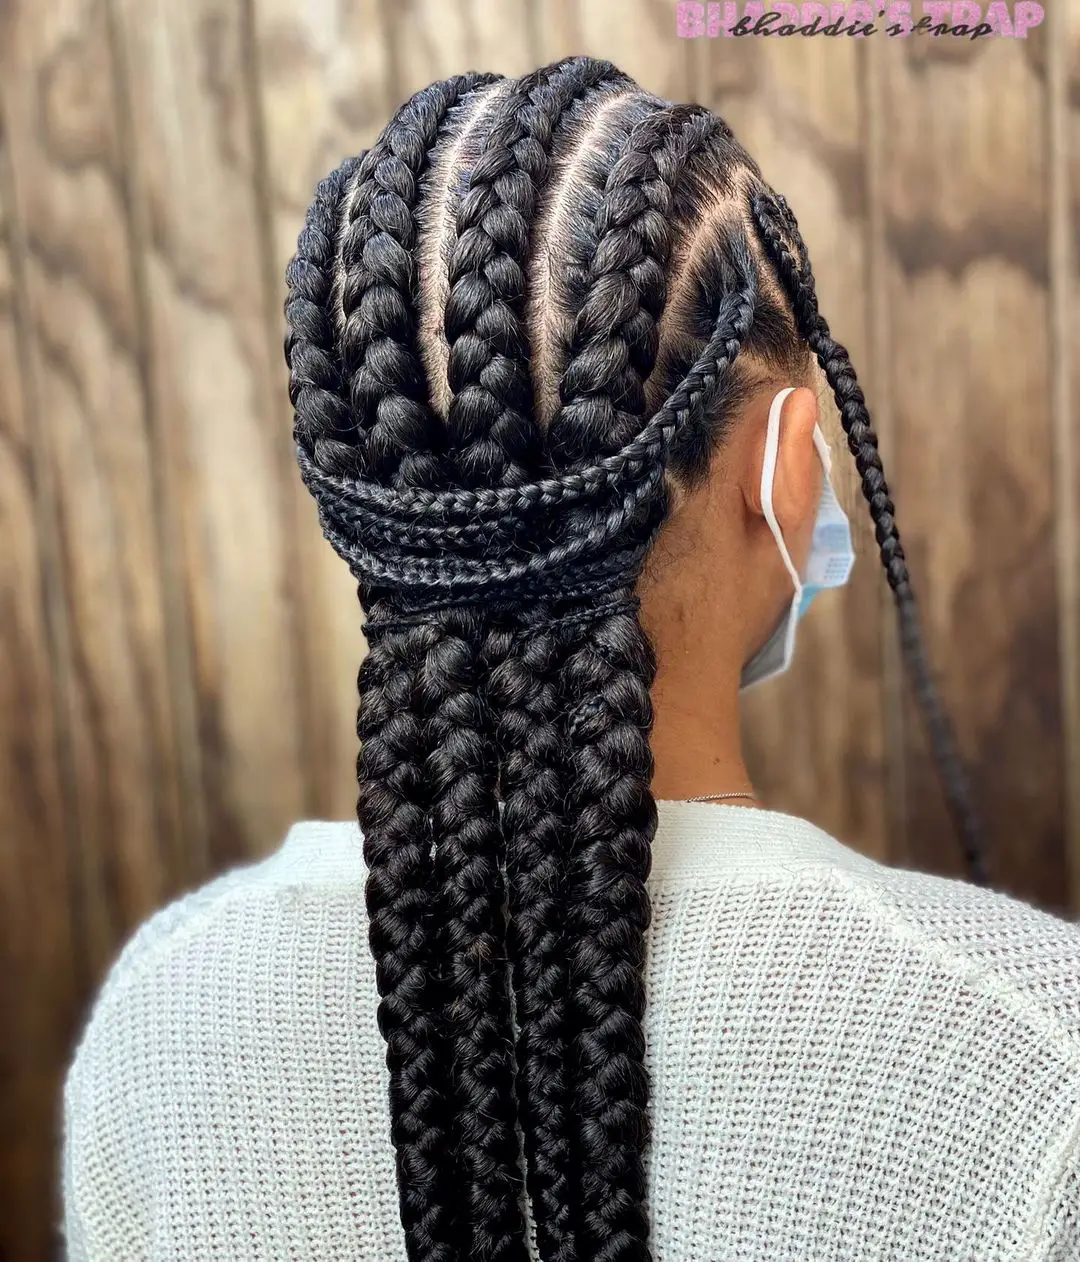 50-best-braided-hairstyles-for-black-women Goddess Braids with Overlapping Braided Accents